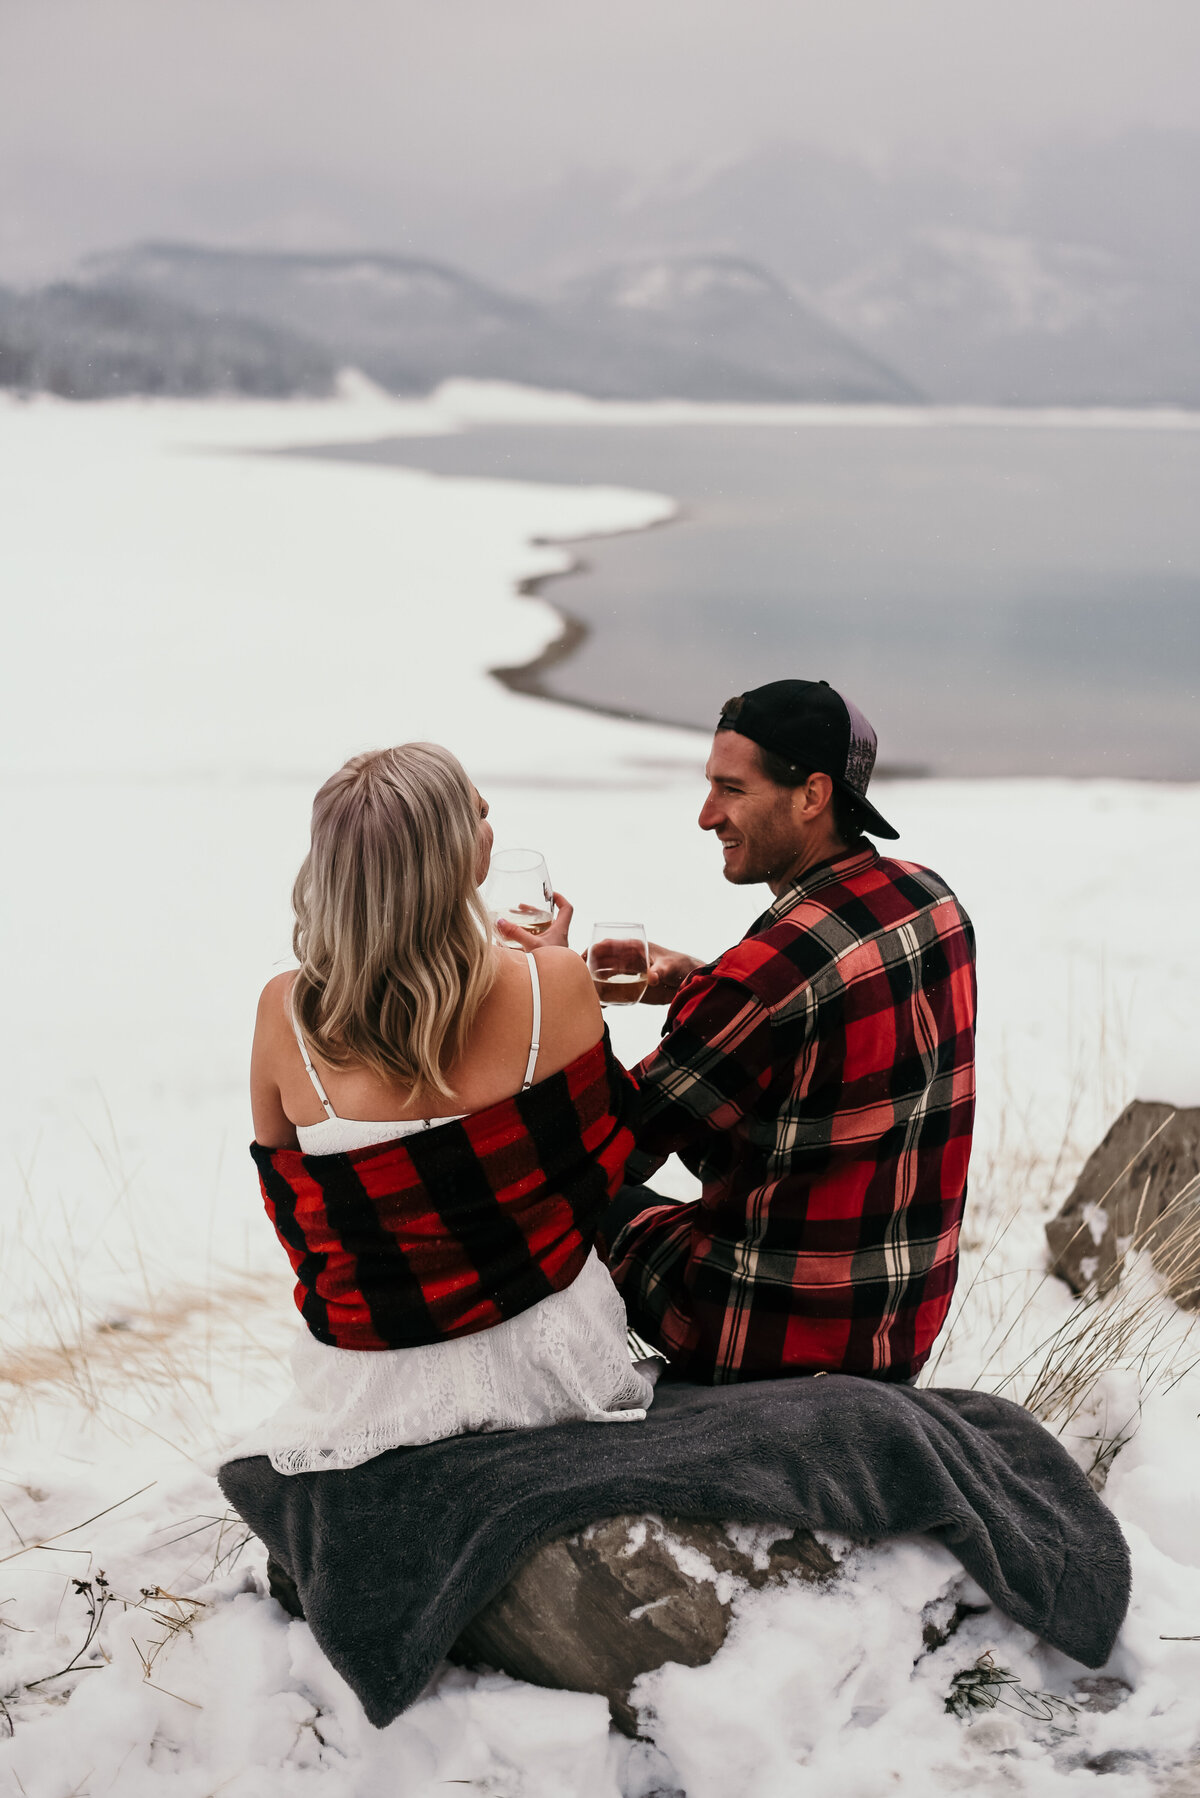 Man and woman share a drink with snow surrounding them looking onto mountain and lake views